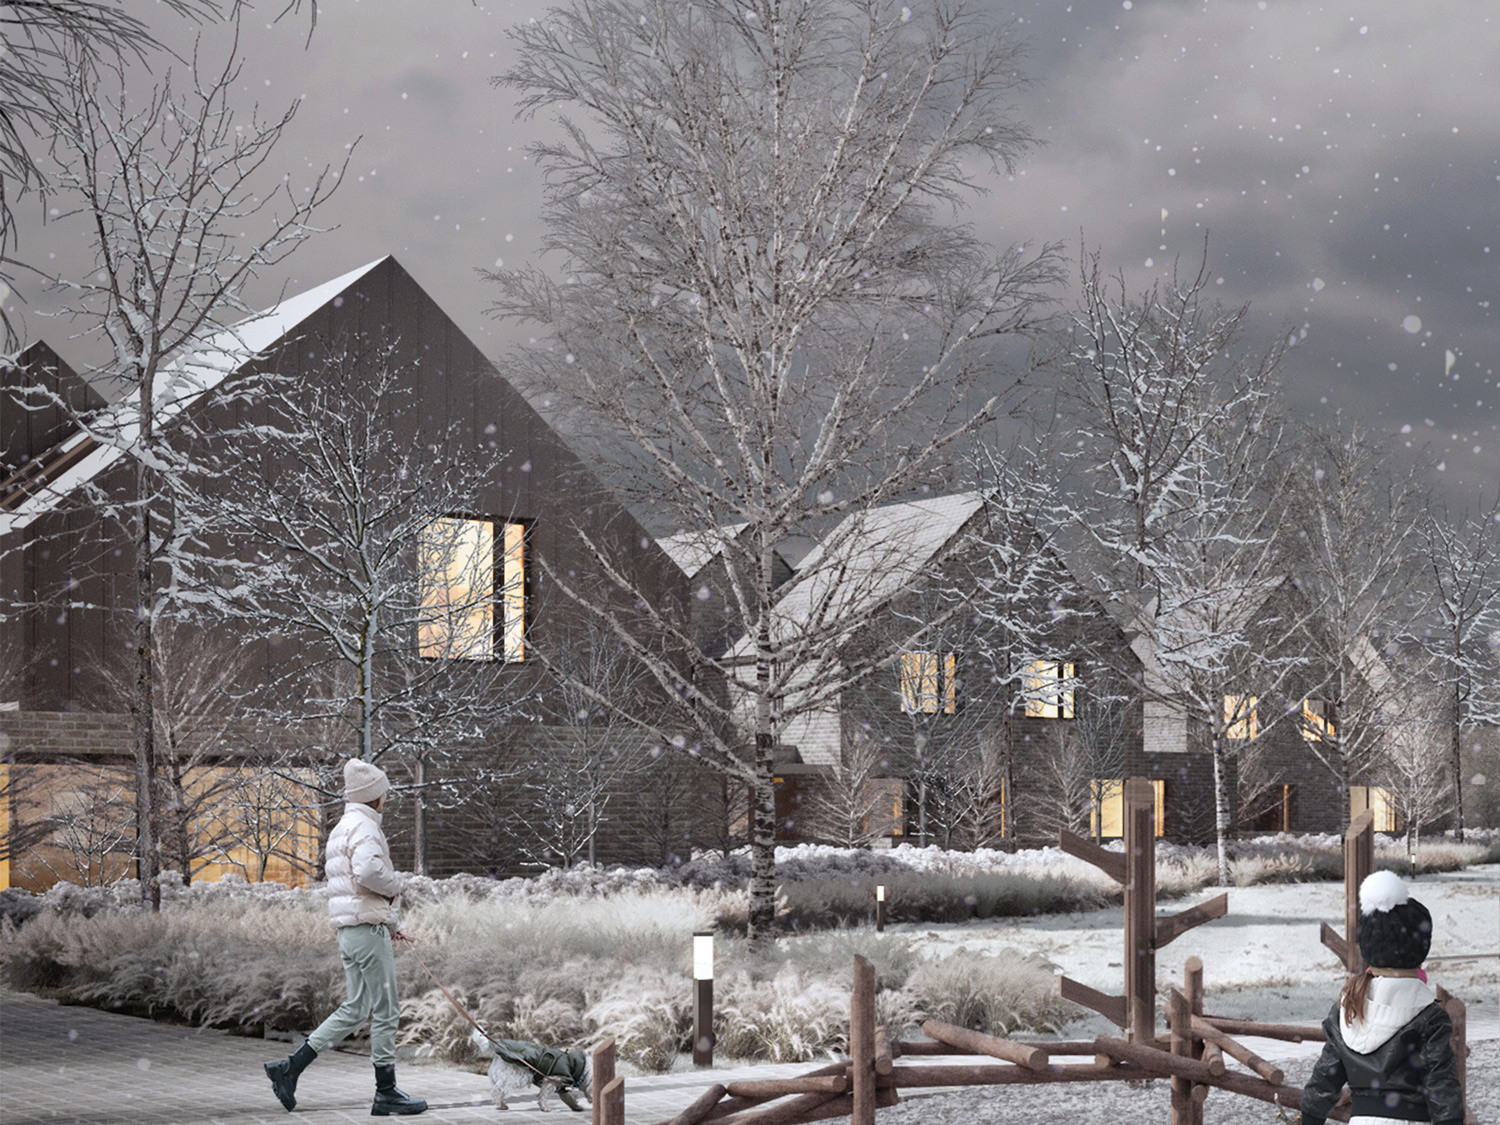 What the new Woodland Villas by CDC studio would look like in the winter